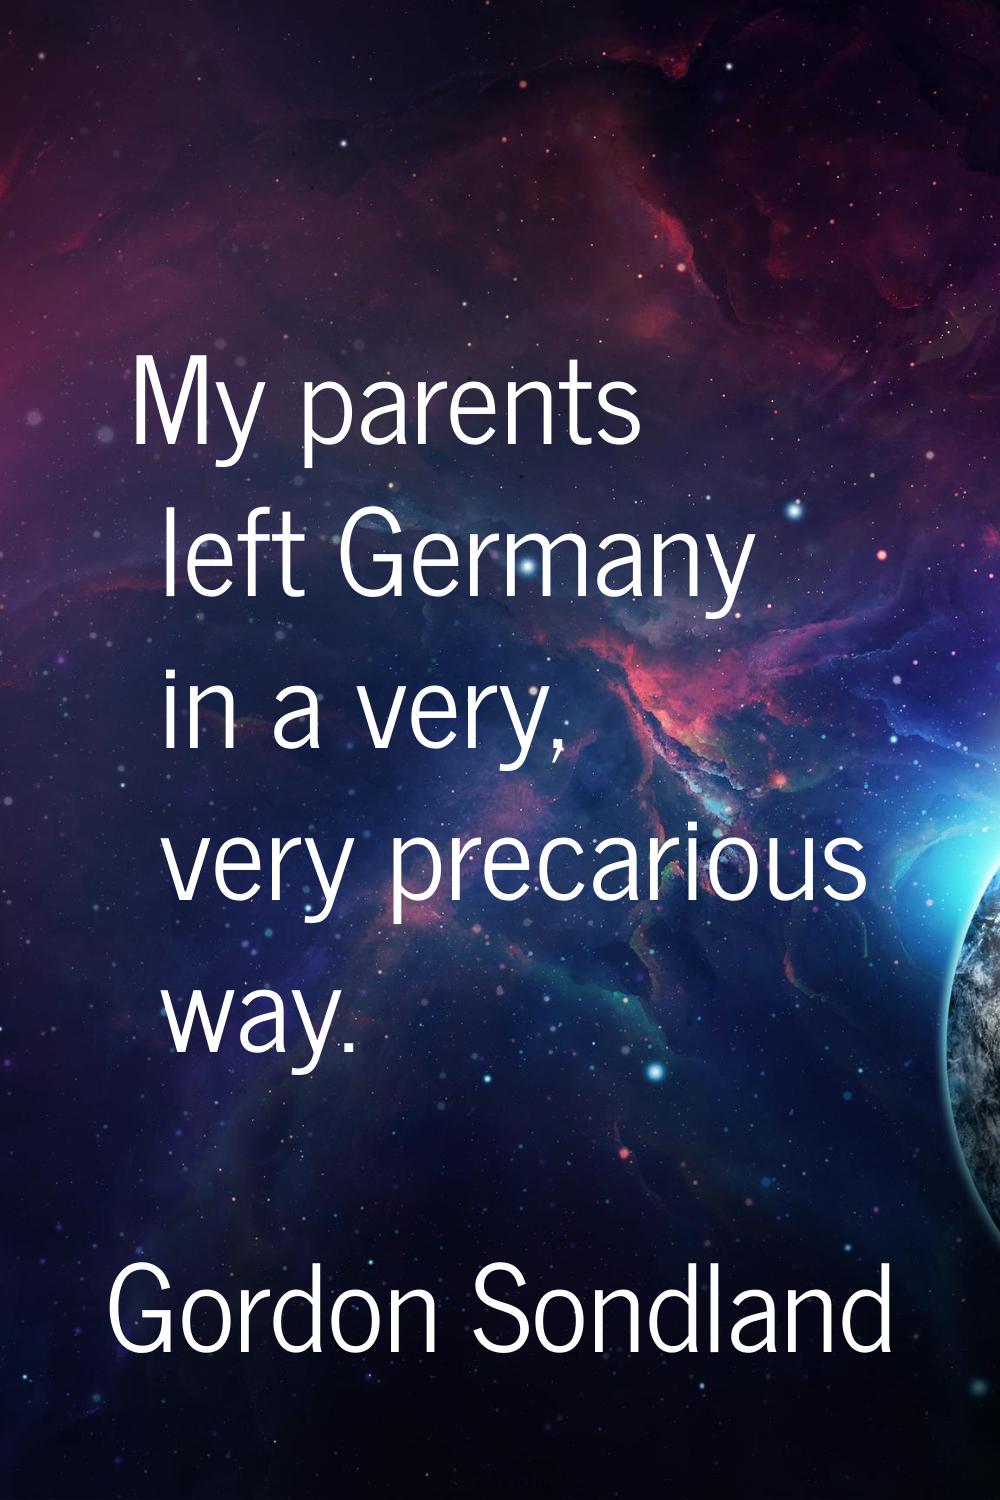 My parents left Germany in a very, very precarious way.